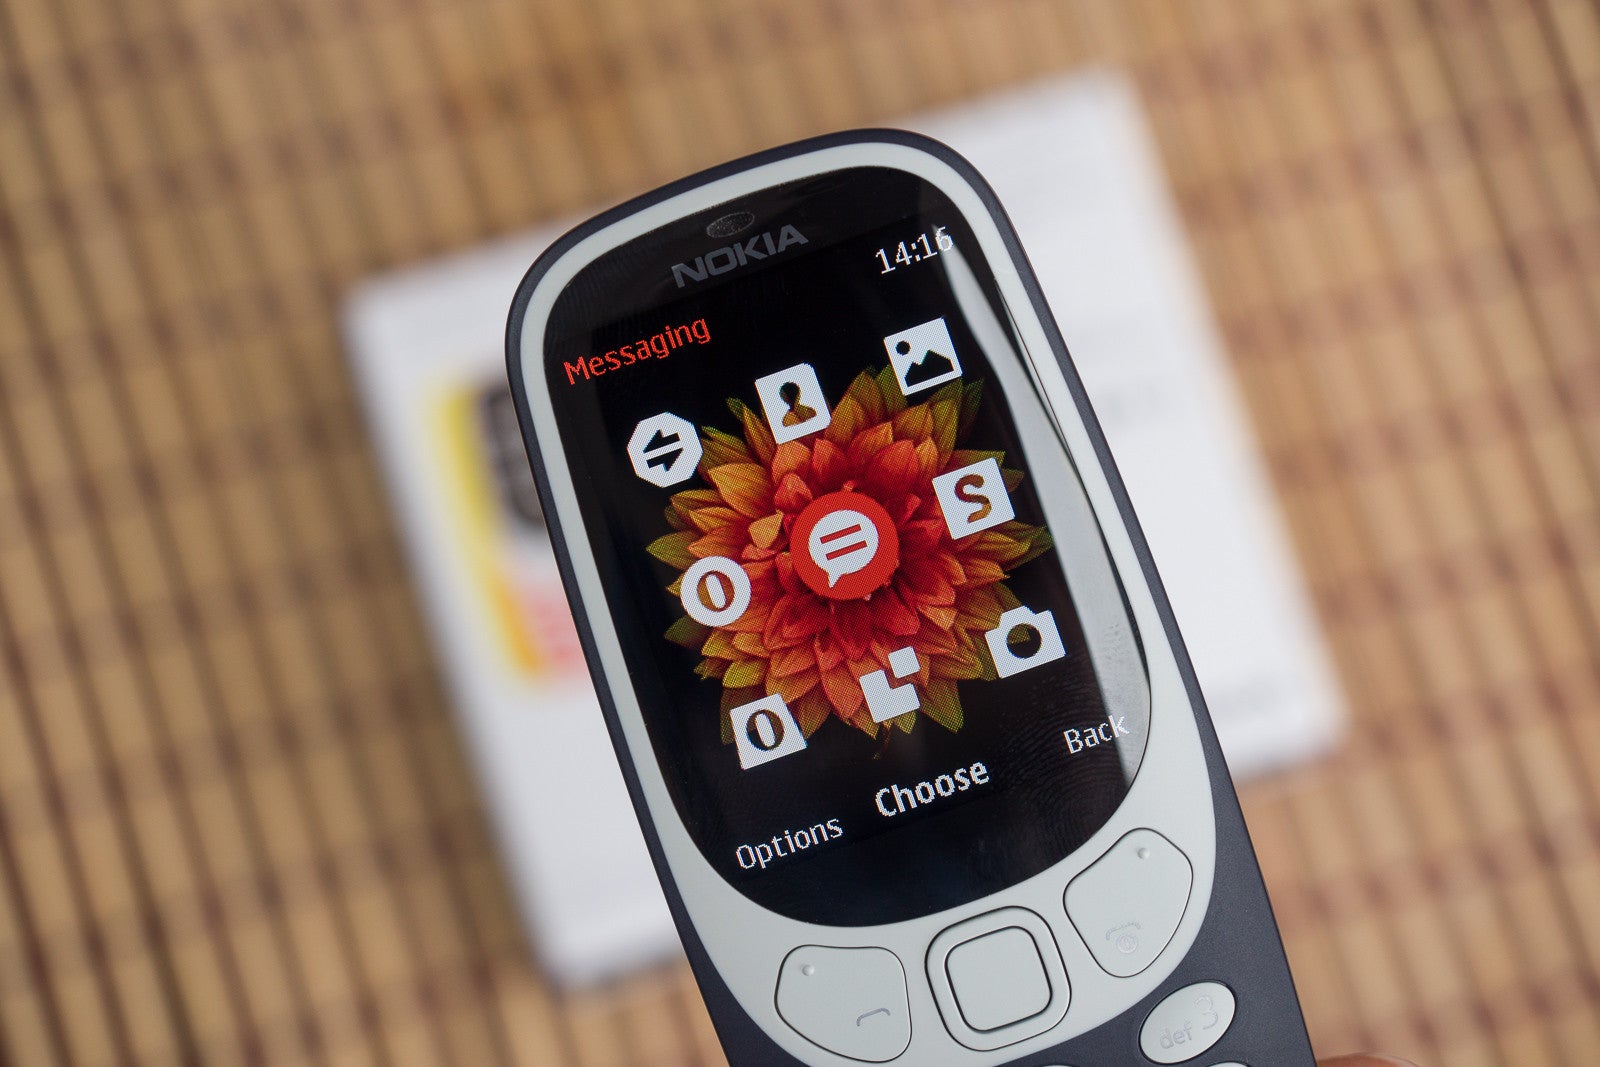 New Nokia 3310 retail box lets you see the phone in all its glory